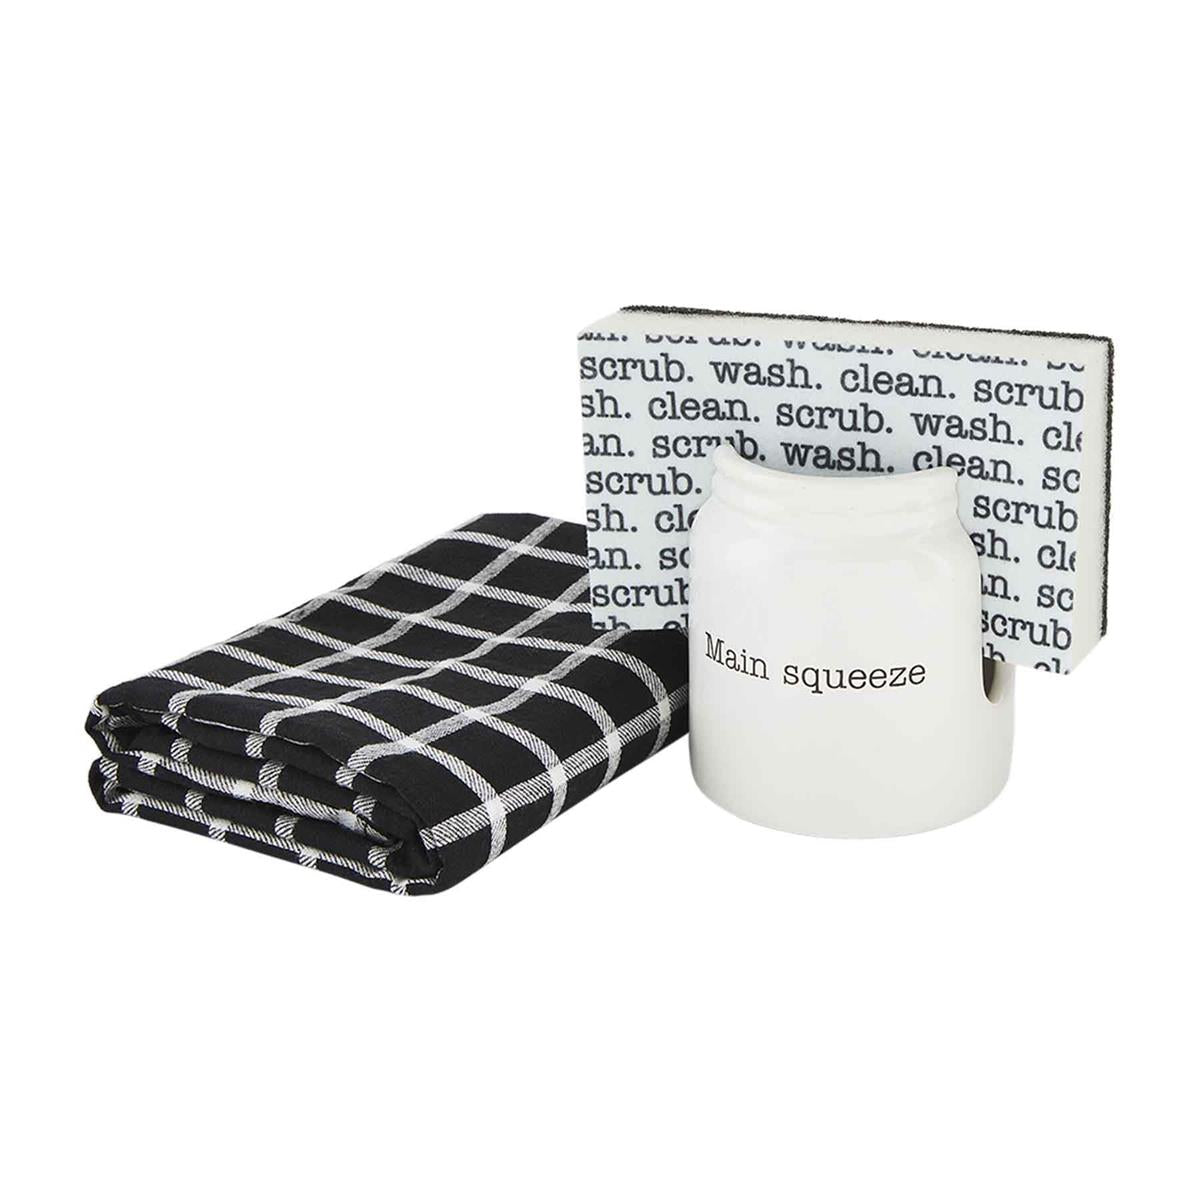 photo of 3 piece kitchen set which includes a sponge, sponge holder and towel in black and white colors